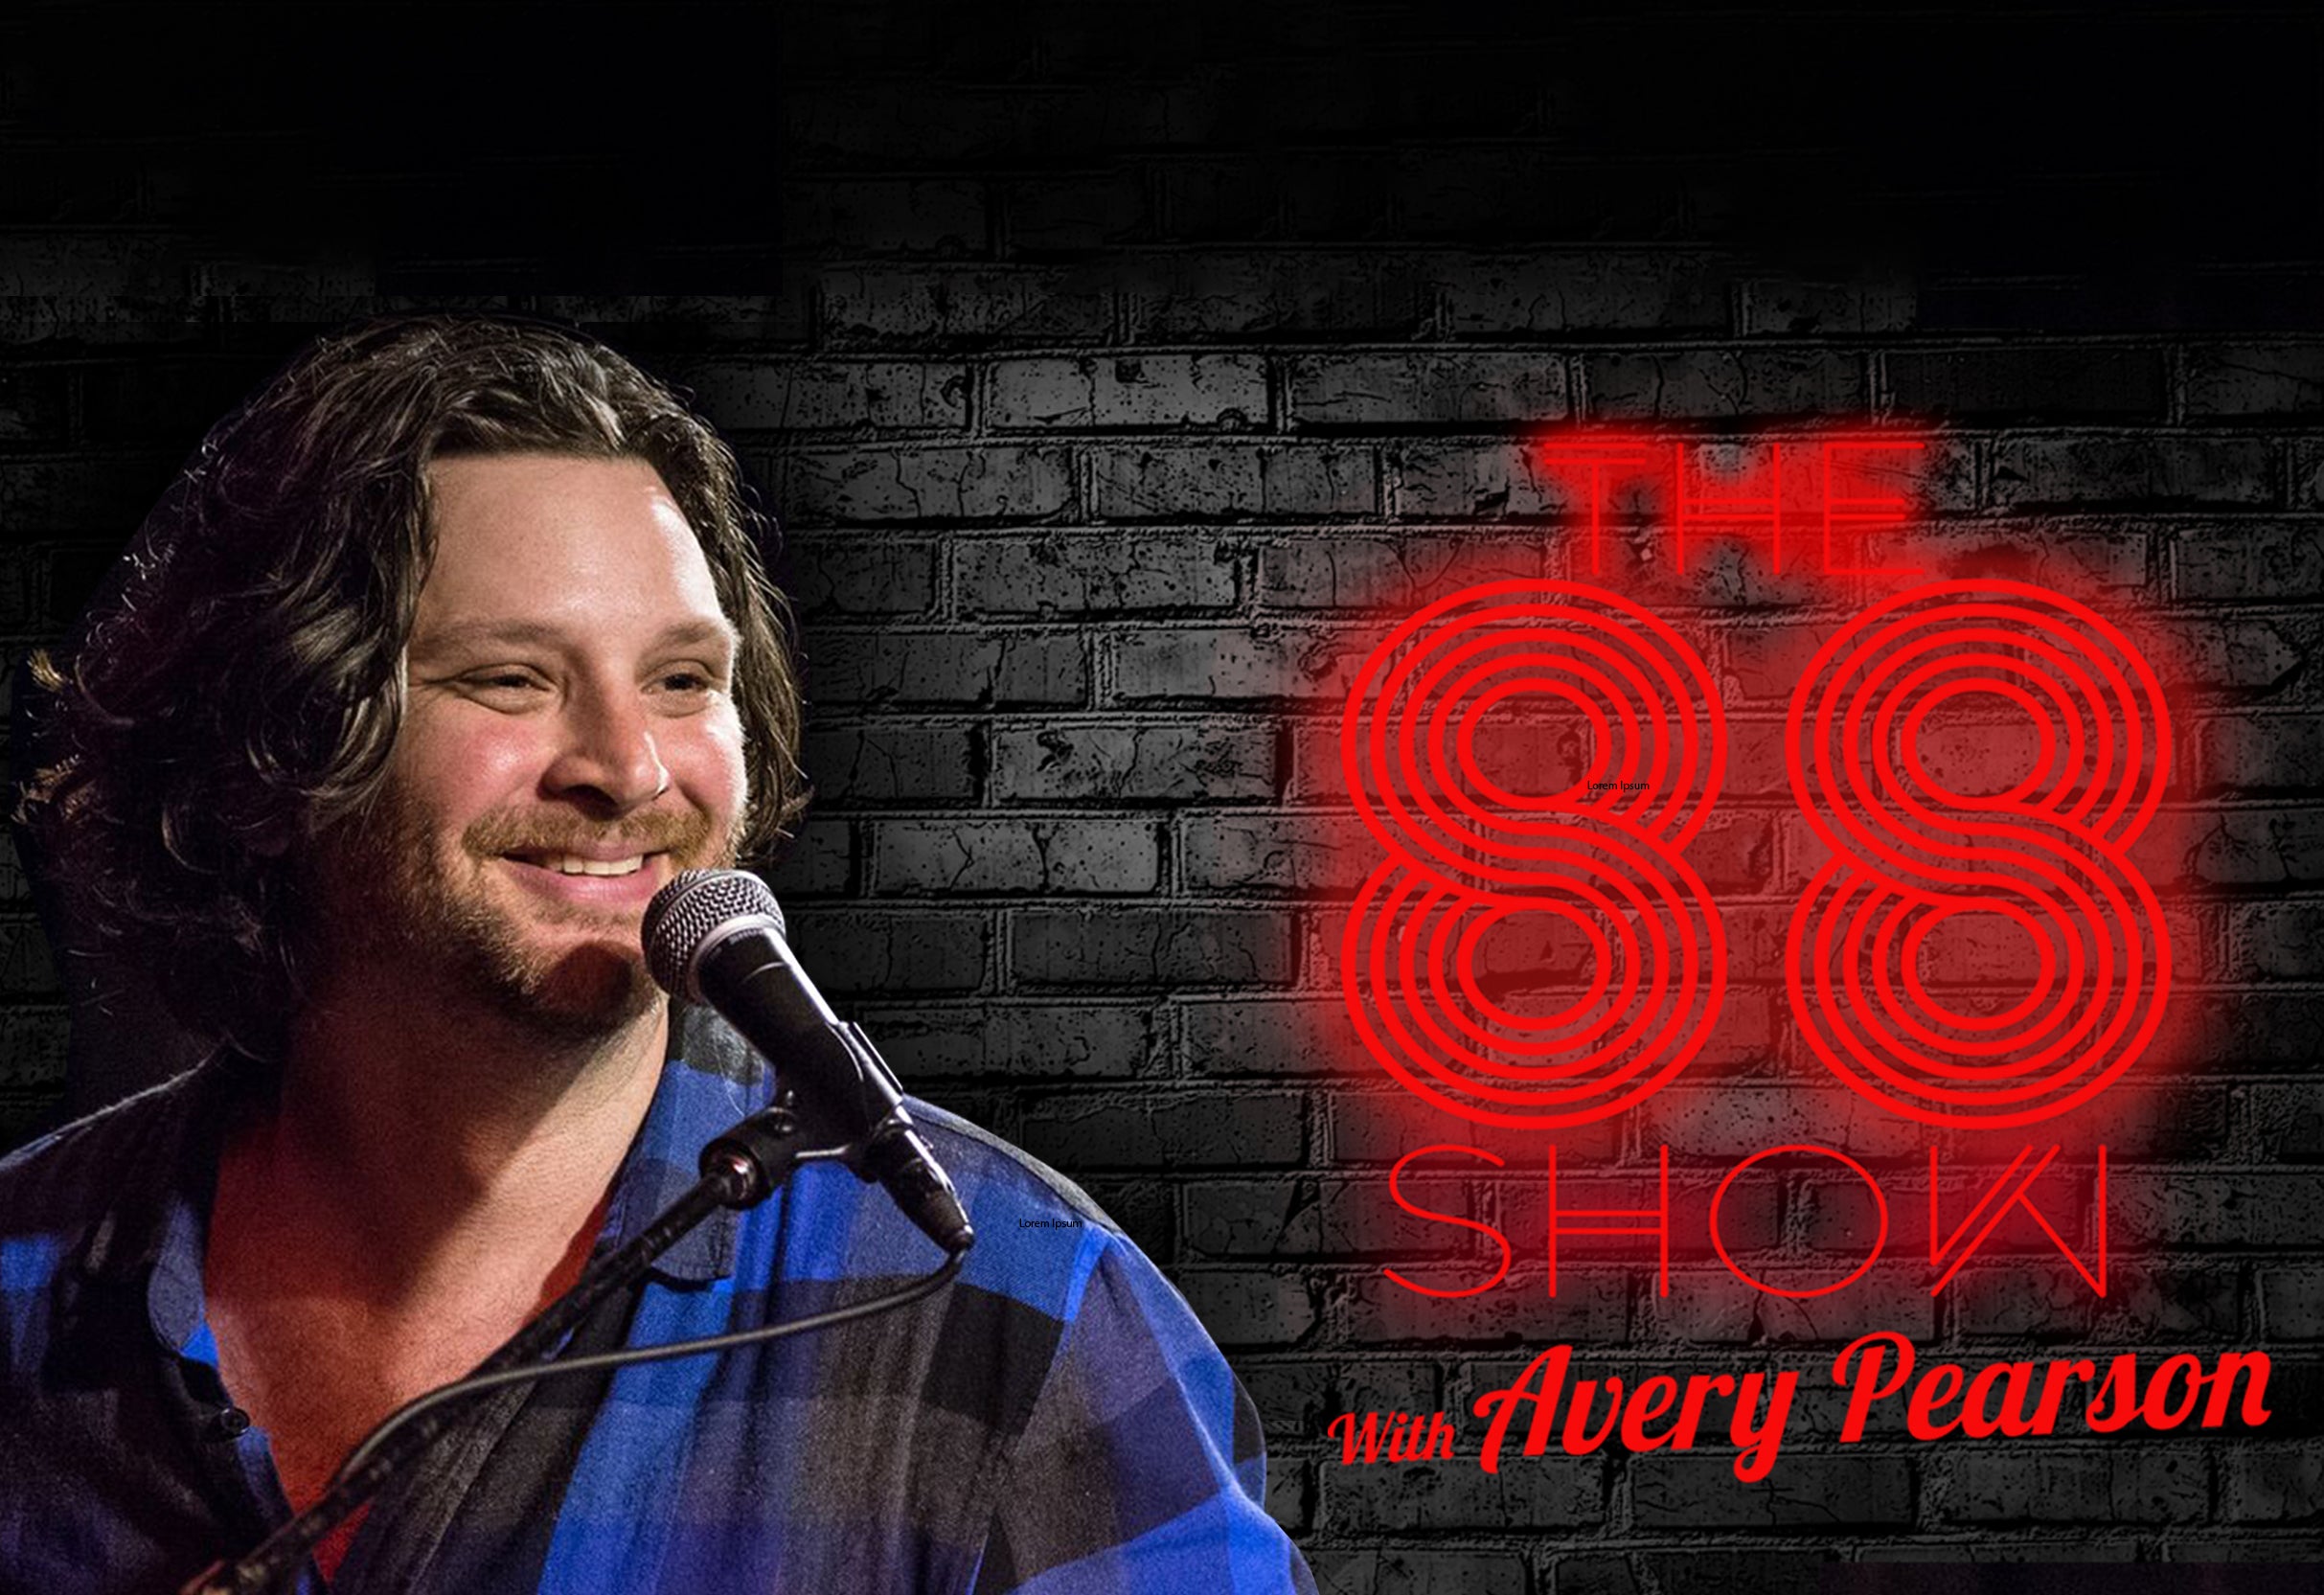 The 88 Show with Avery Pearson presale information on freepresalepasswords.com